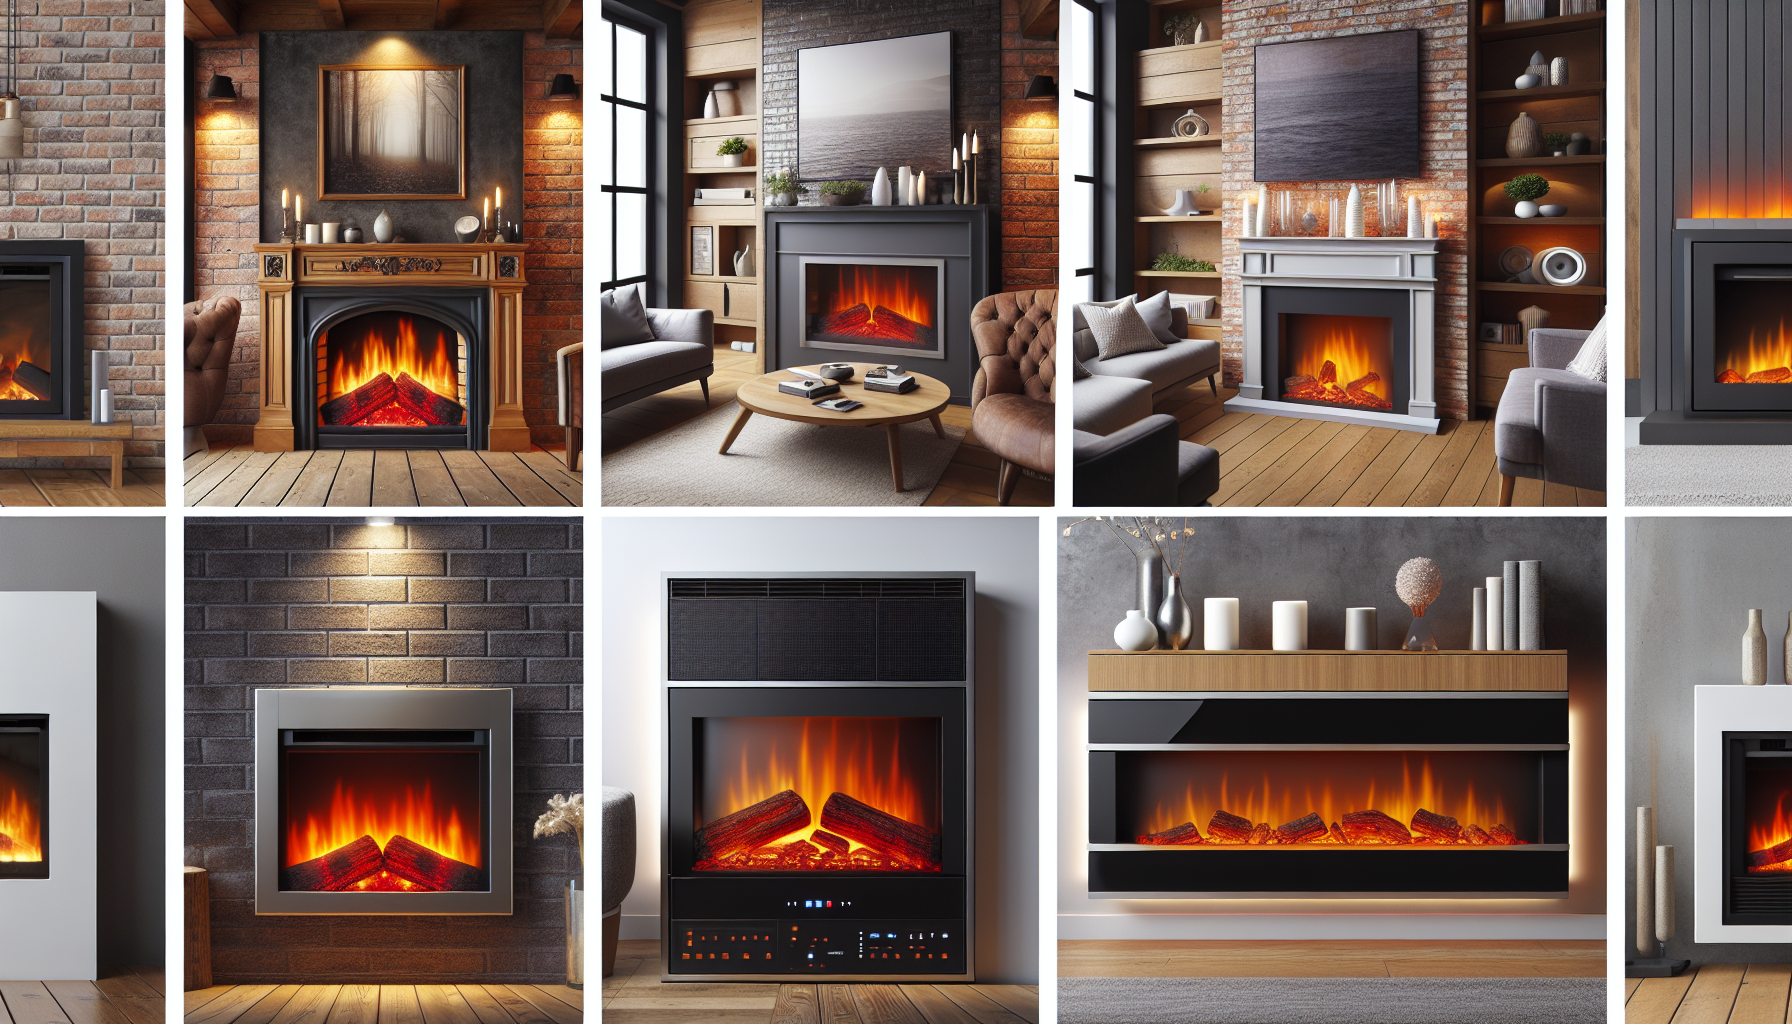 Types of gas fireplaces offered by JR Gas Water